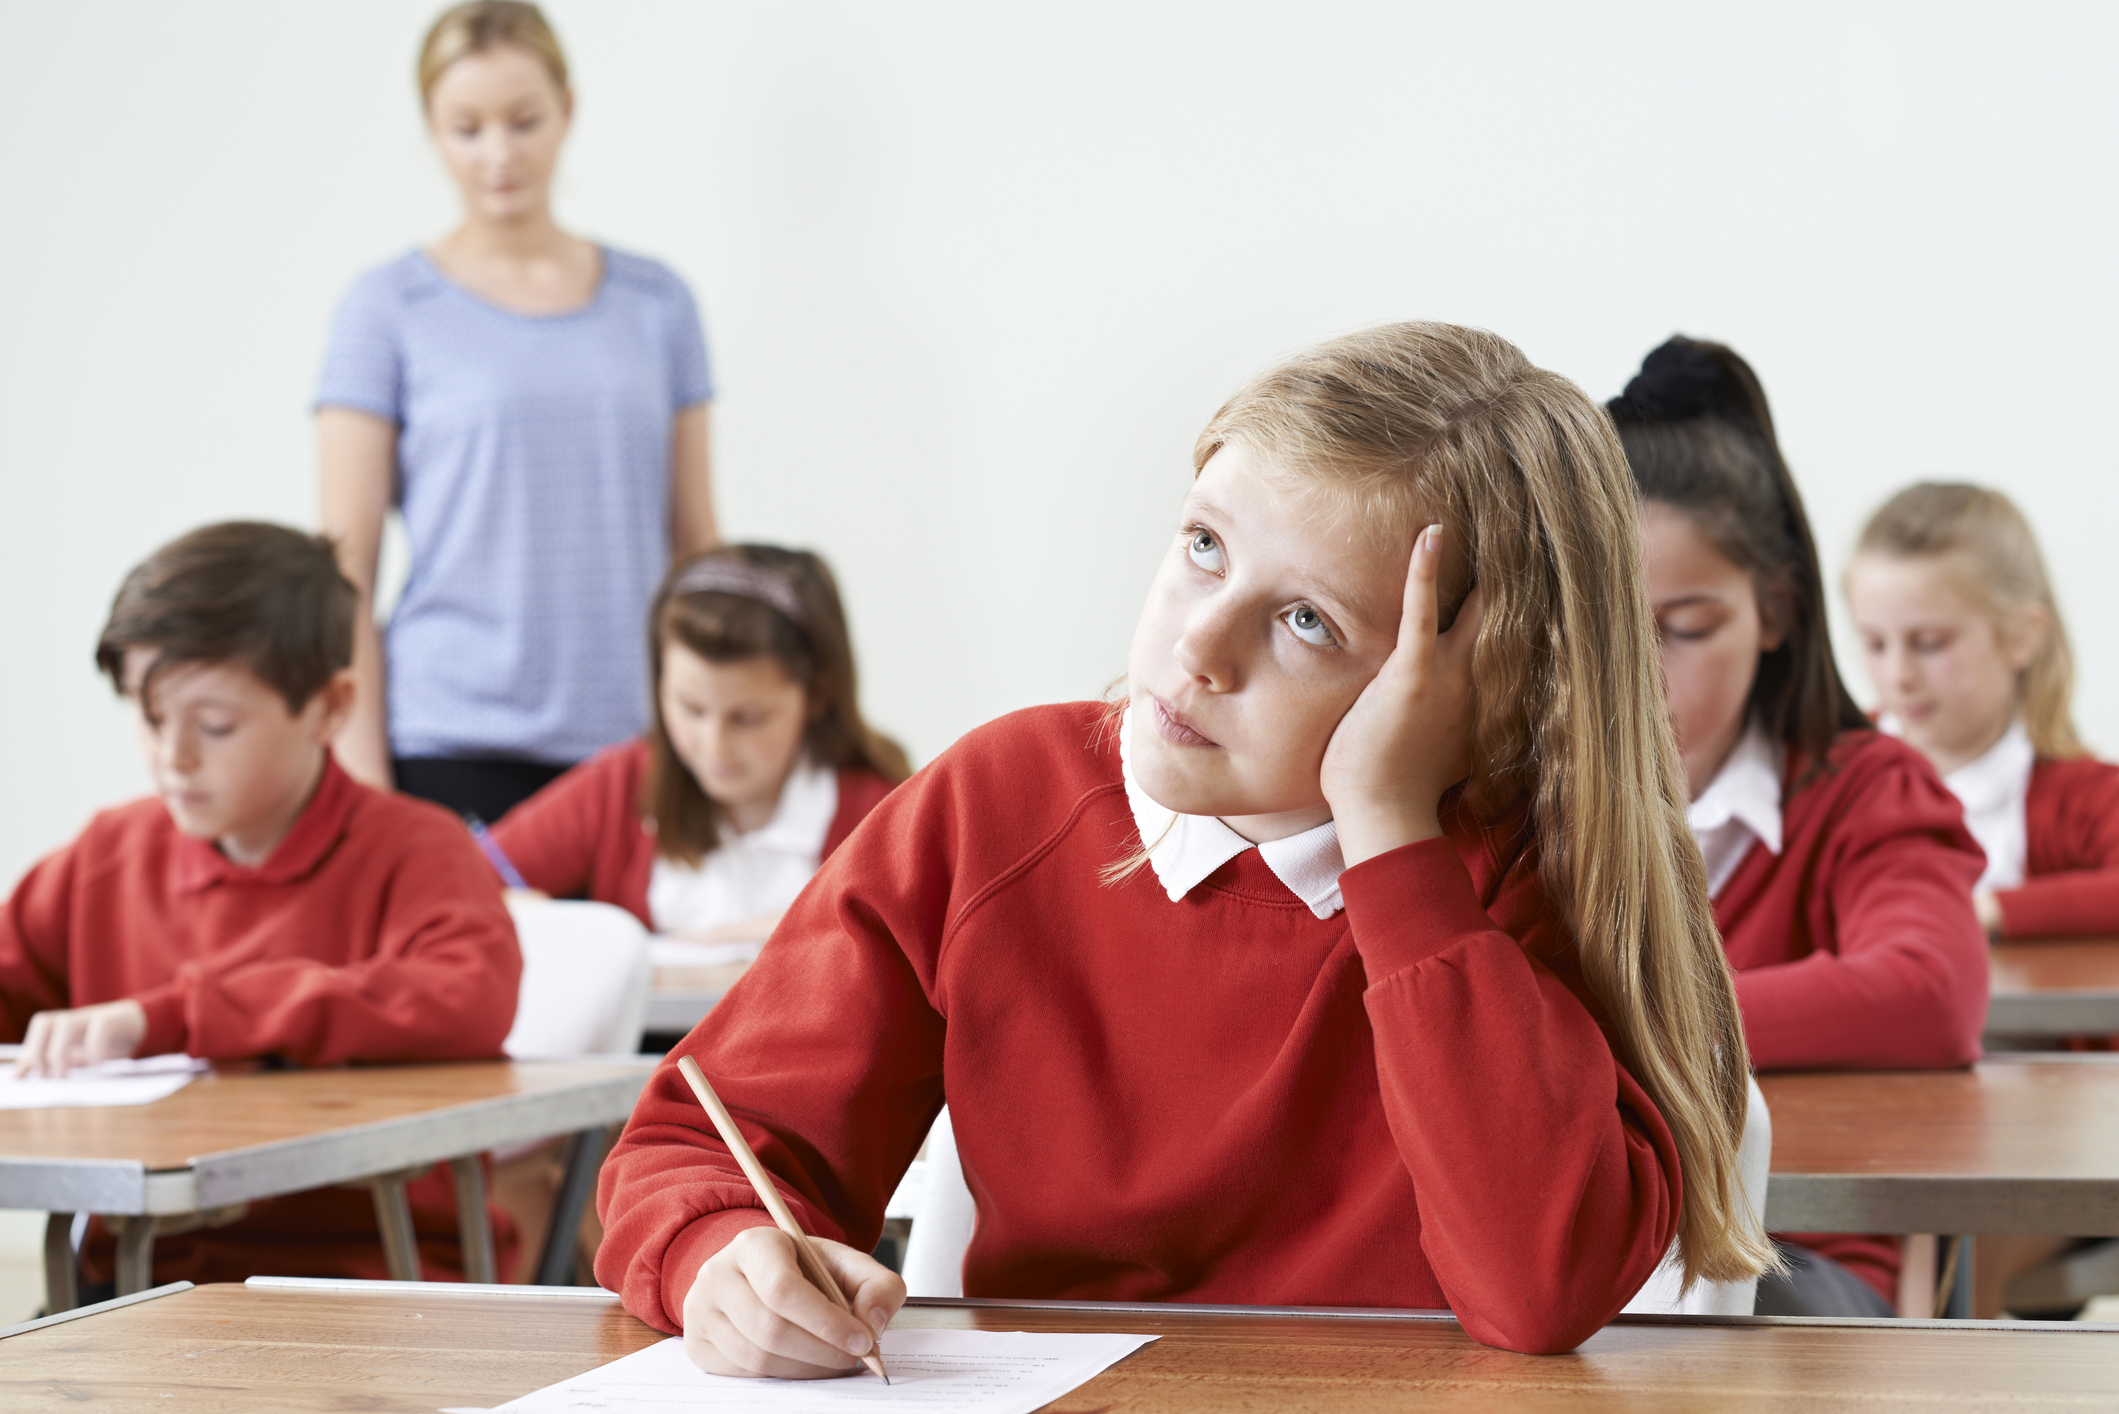 Middle school students in red school uniforms work on a class assignment while one blonde girl sits confused, not understanding the instructions